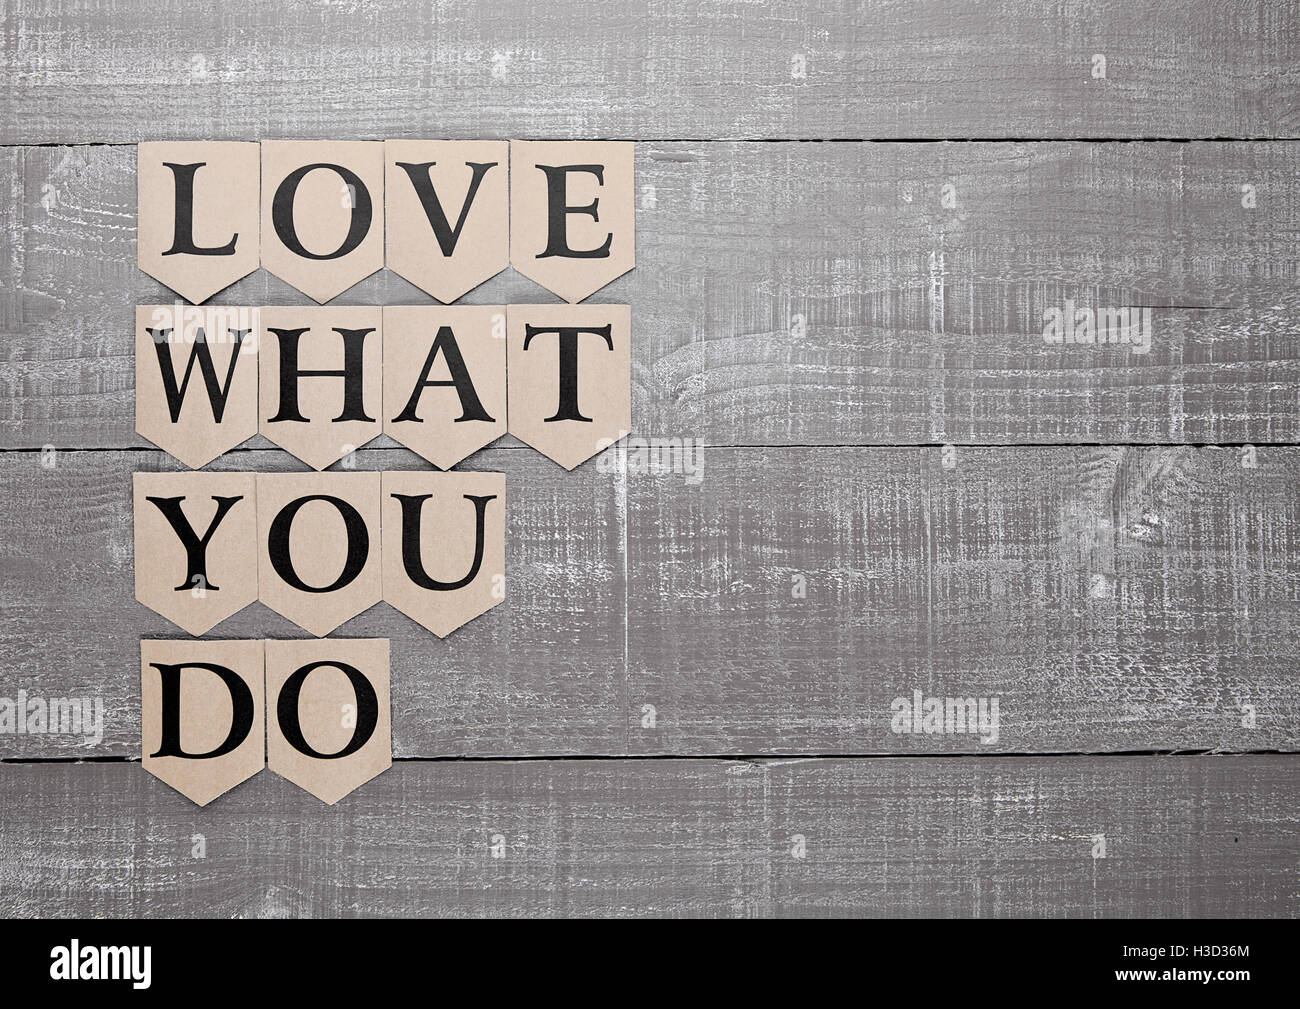 love what you do motivation symbol on wooden board Stock Photo